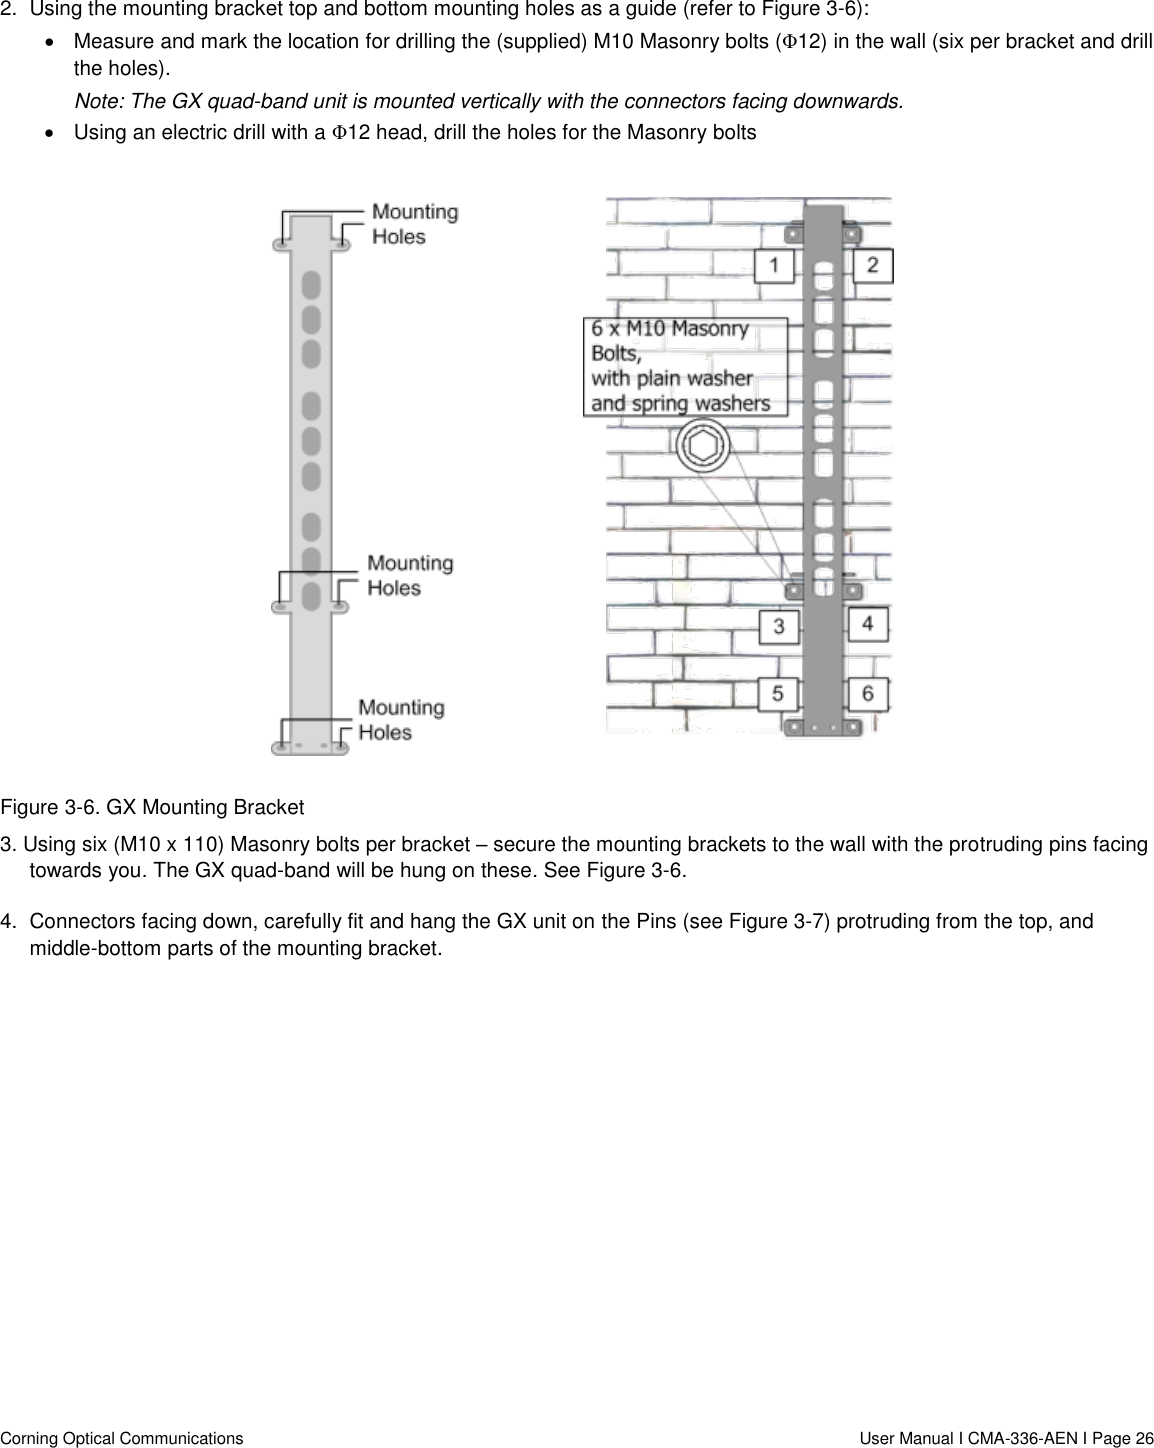   Corning Optical Communications                  User Manual I CMA-336-AEN I Page 26 2.  Using the mounting bracket top and bottom mounting holes as a guide (refer to Figure 3-6):   Measure and mark the location for drilling the (supplied) M10 Masonry bolts (Φ12) in the wall (six per bracket and drill the holes). Note: The GX quad-band unit is mounted vertically with the connectors facing downwards.    Using an electric drill with a Φ12 head, drill the holes for the Masonry bolts   Figure 3-6. GX Mounting Bracket 3. Using six (M10 x 110) Masonry bolts per bracket – secure the mounting brackets to the wall with the protruding pins facing towards you. The GX quad-band will be hung on these. See Figure 3-6. 4.  Connectors facing down, carefully fit and hang the GX unit on the Pins (see Figure 3-7) protruding from the top, and middle-bottom parts of the mounting bracket.  